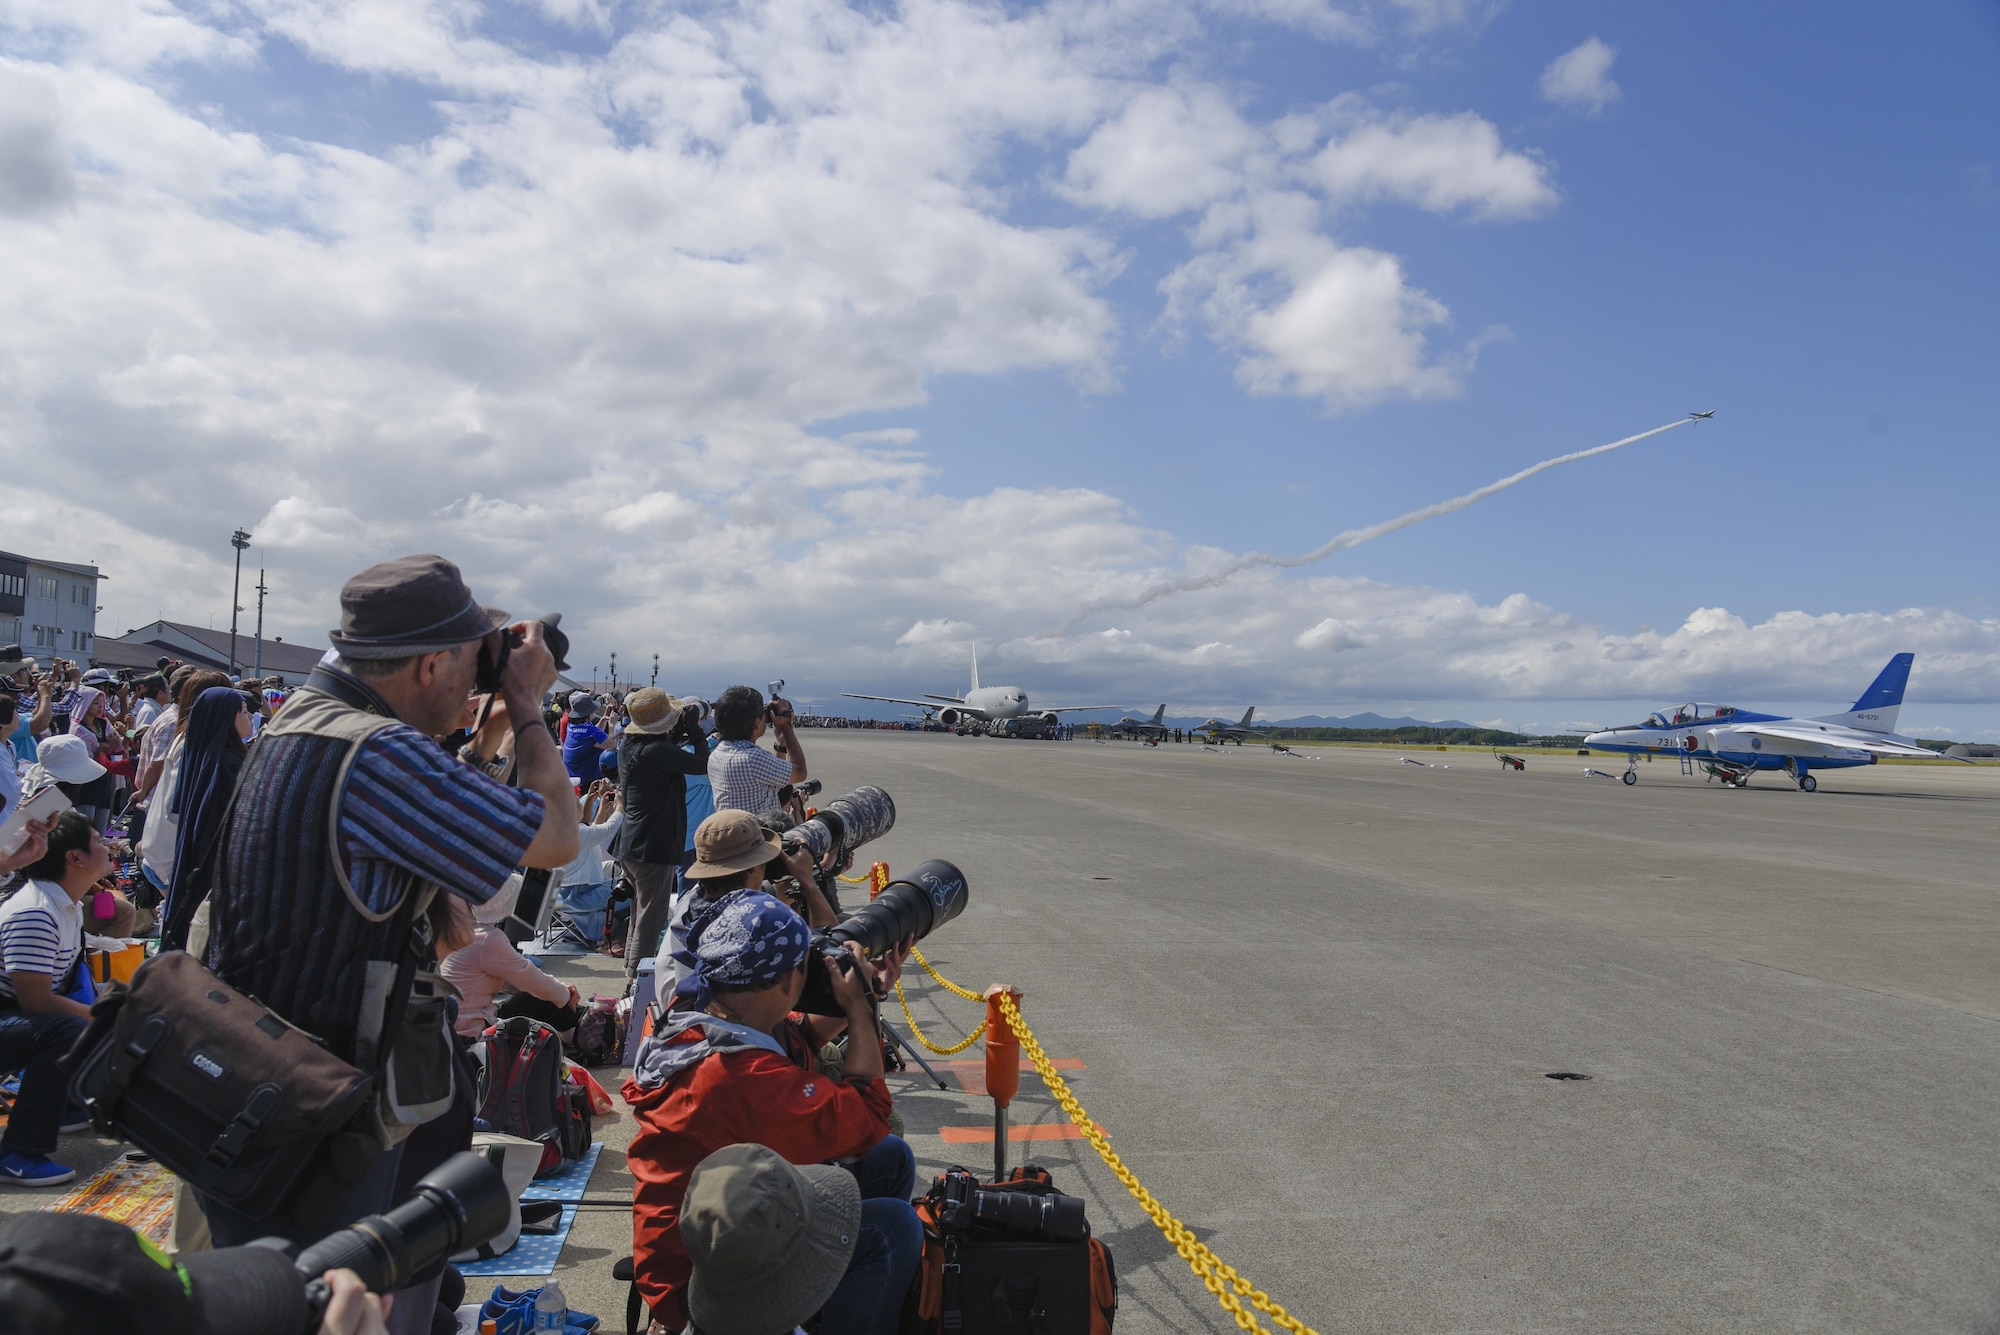 Attendees take photos of the Japan Air Self-Defense Force aerobatic demonstration during Misawa Air Fest 2016 at Misawa Air Base, Japan, Sept. 11, 2016. Approximately 80,000 people attended the event and experienced static displays and demonstrations from both the JASDF and U.S. armed forces. (U.S. Air Force photo by Airman 1st Class Sadie Colbert)